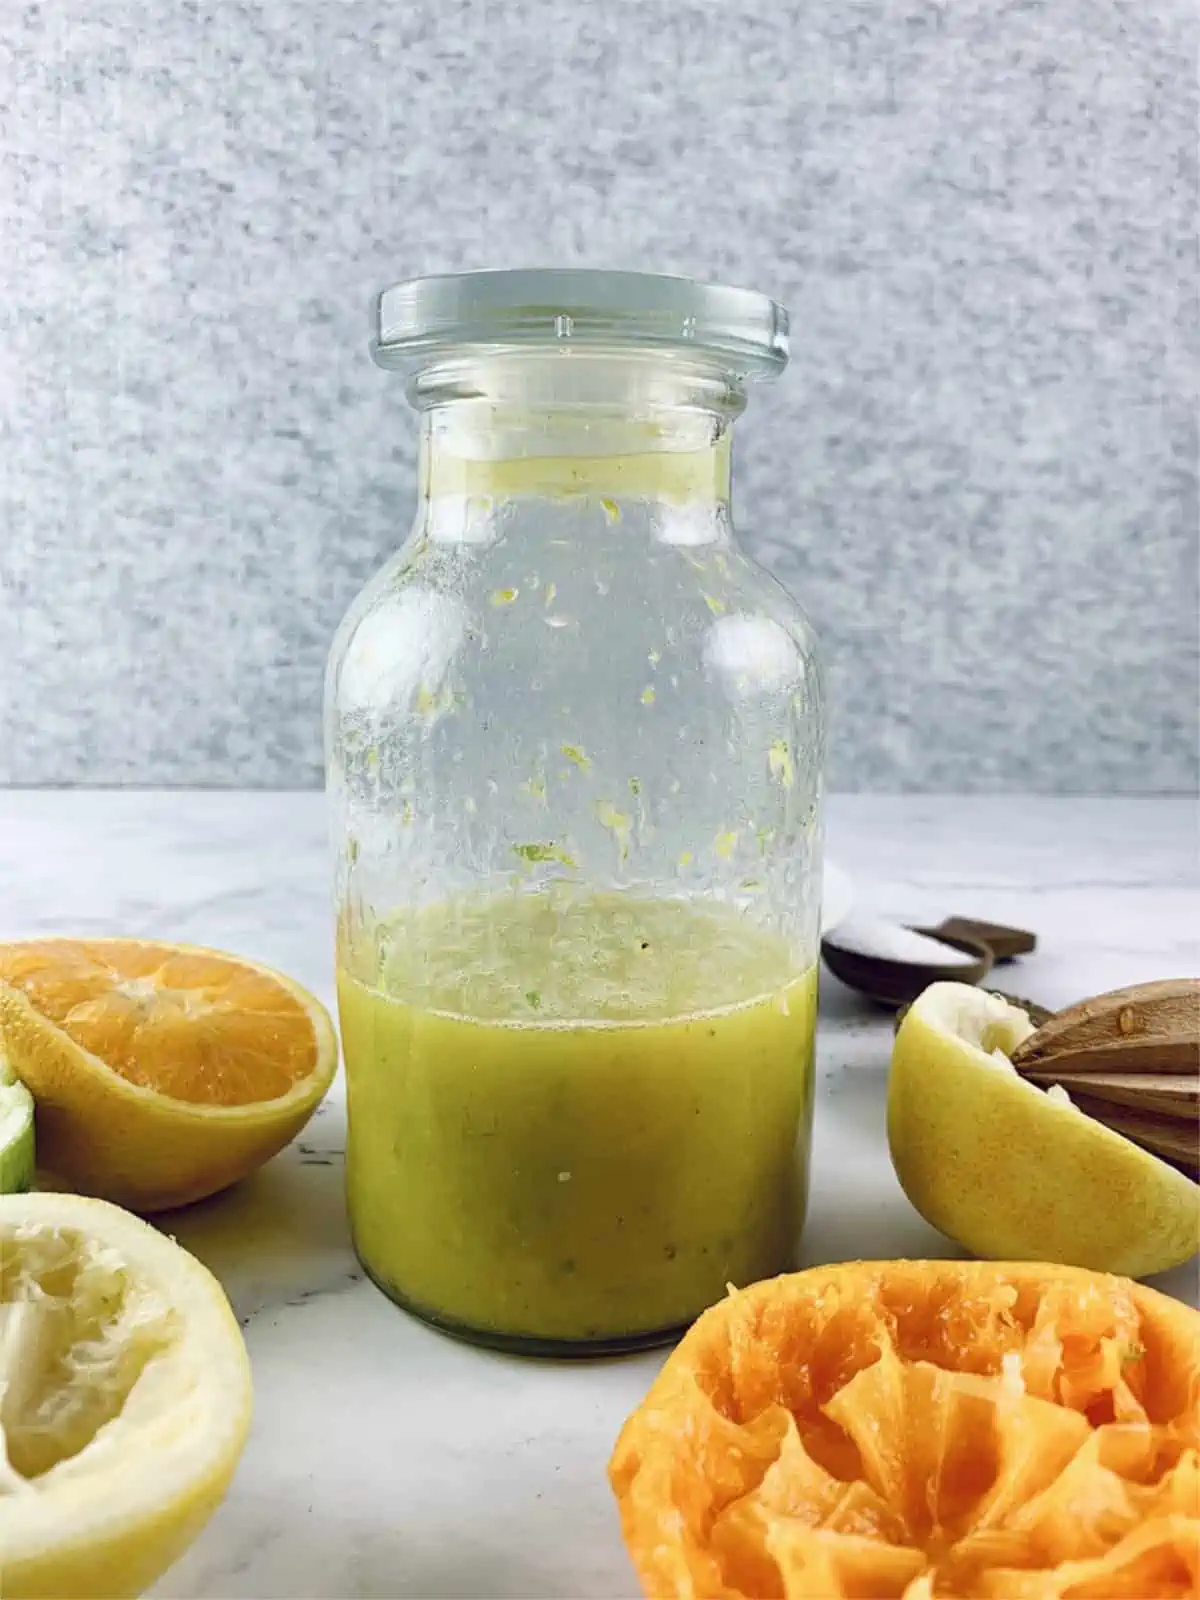 Citrus salad dressing in a glass bottle with ingredients scattered around.